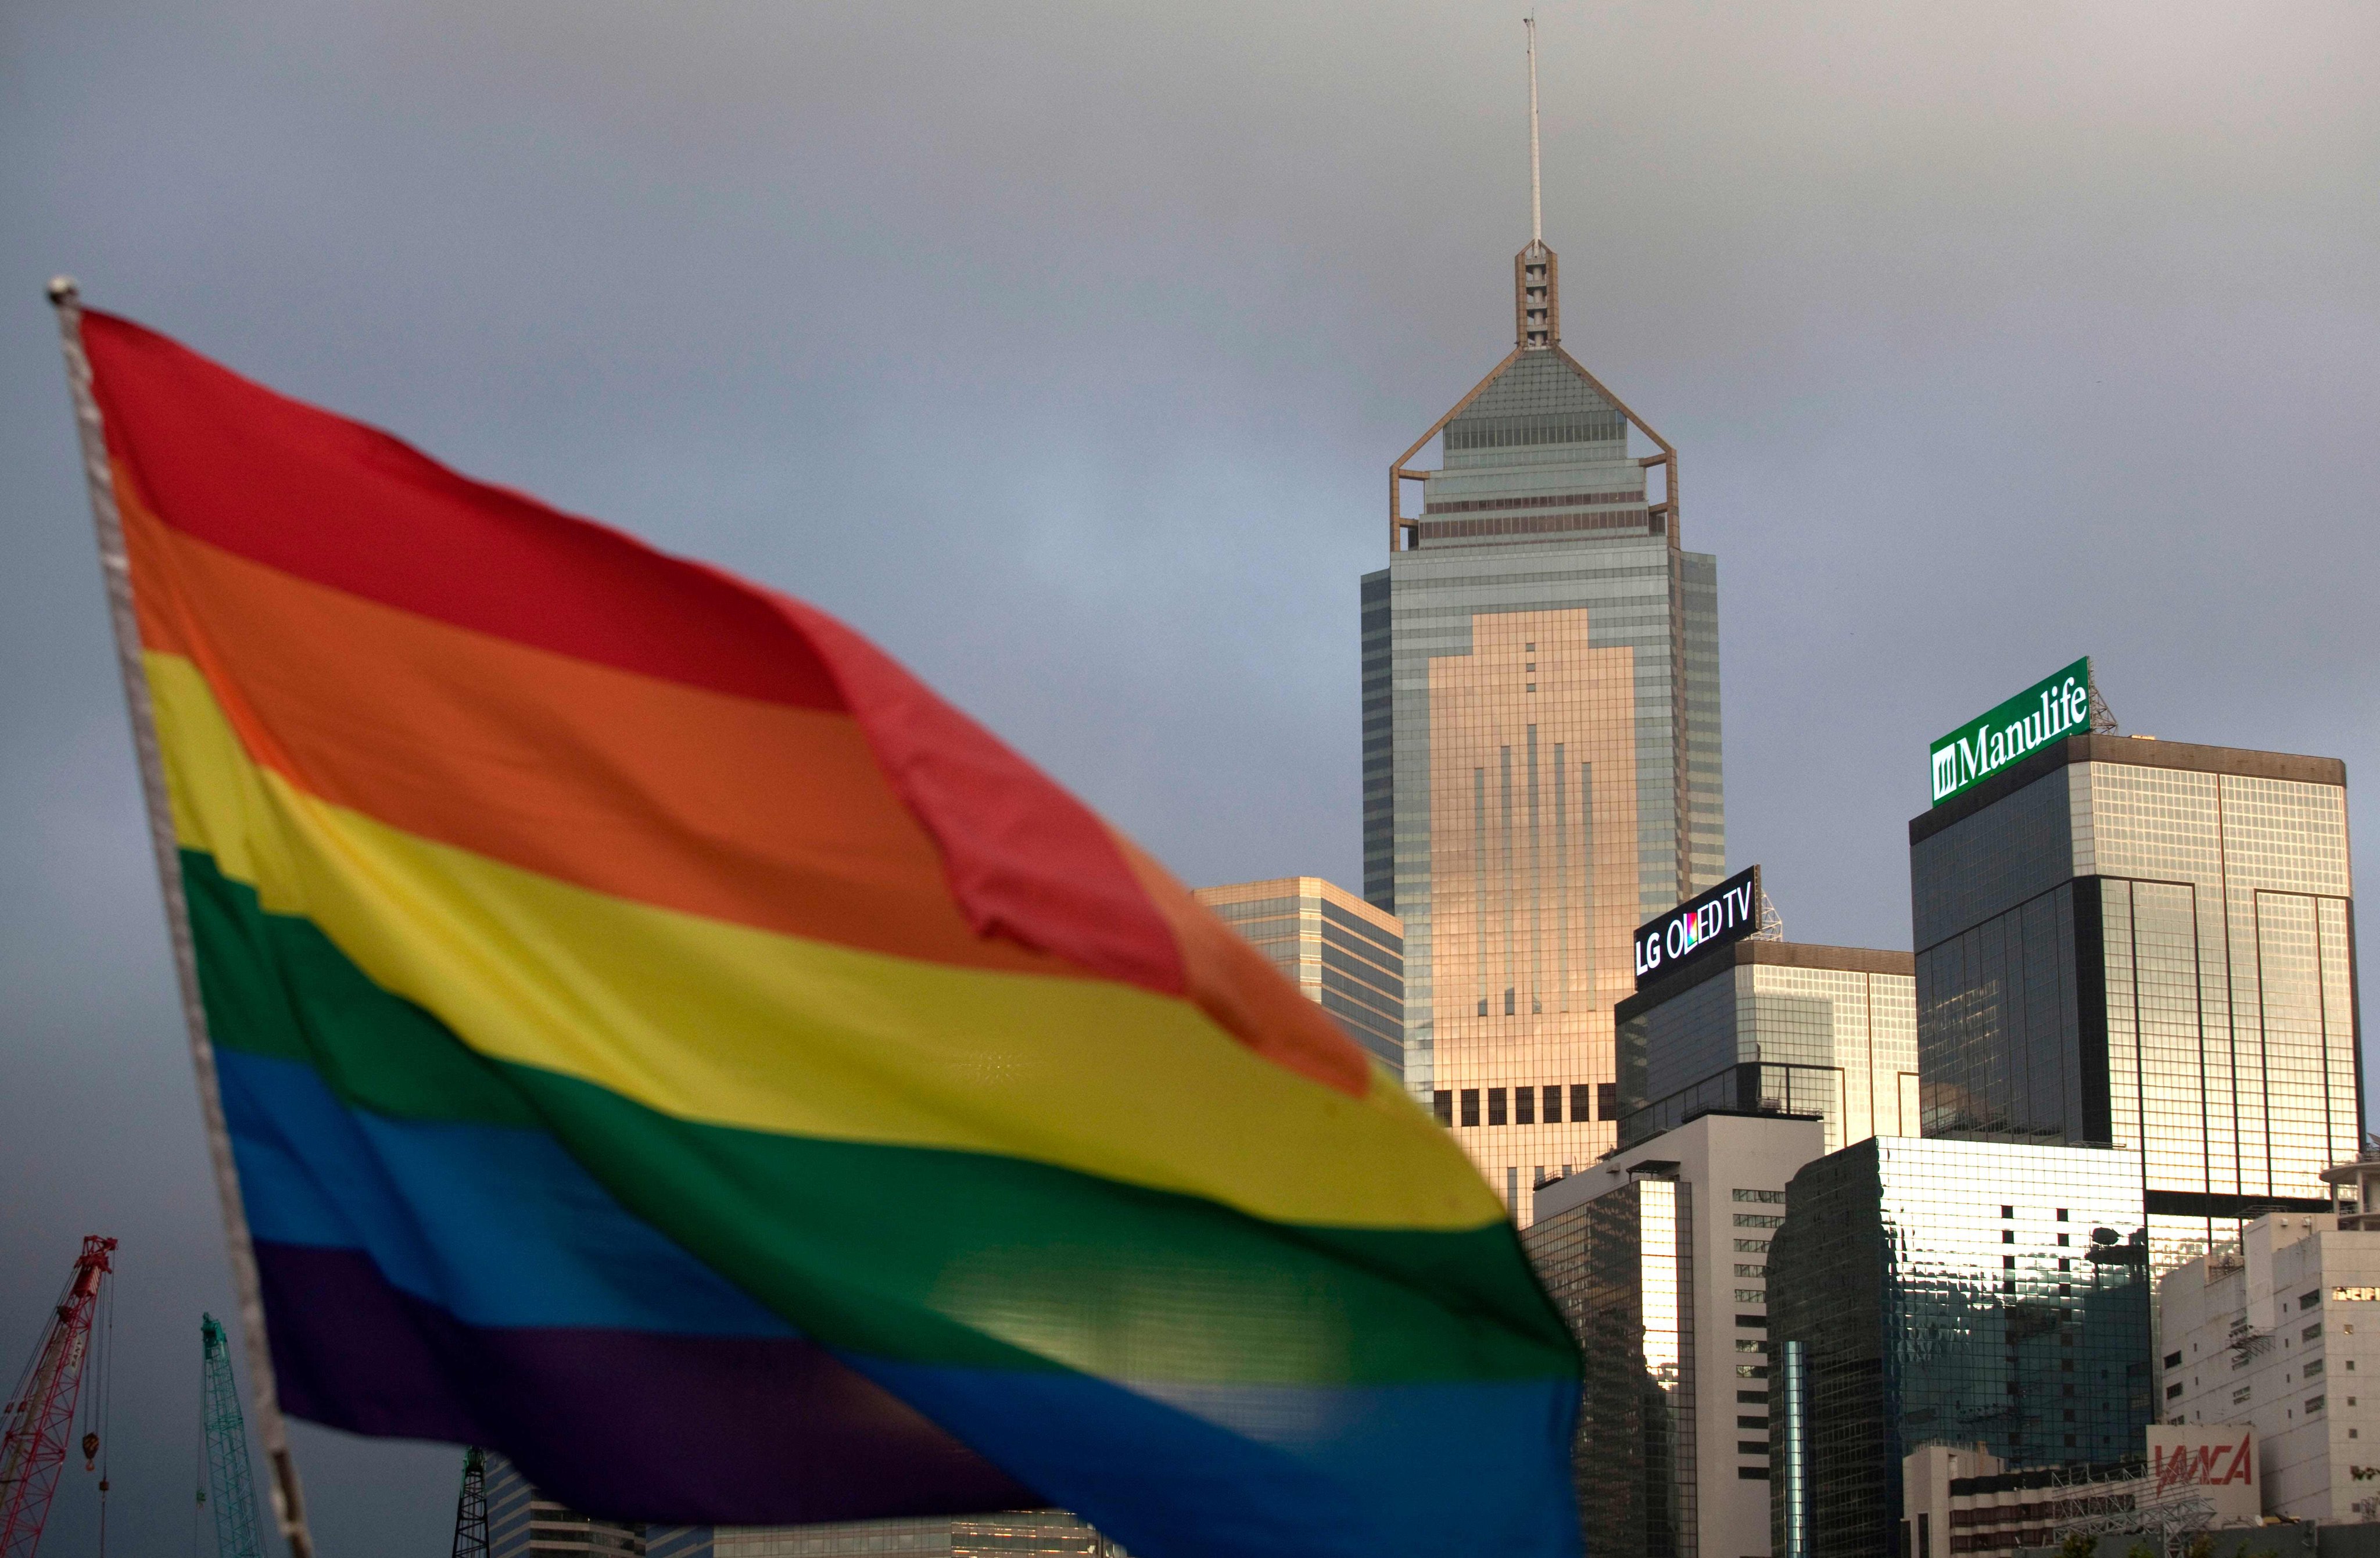 Hong Kong was originally to be the sole host of the Gay Games, but the organisers decided in February the Mexican city of Guadalajara would share the duties. Photo: AFP